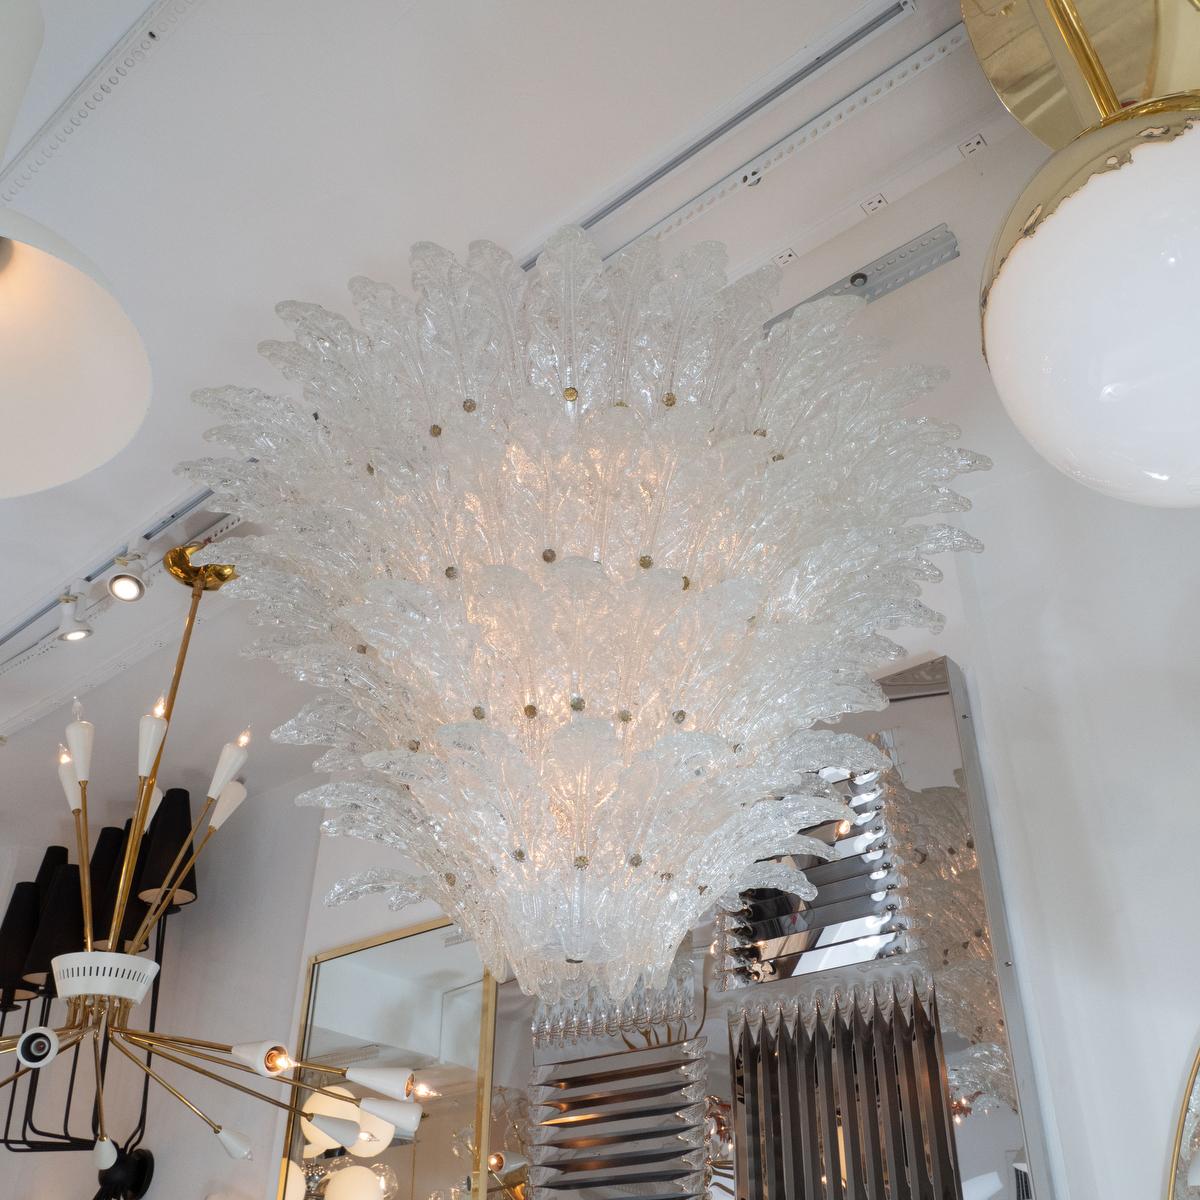 Tiered frosted glass leaf chandelier with brass finial details in the style of Barovier.